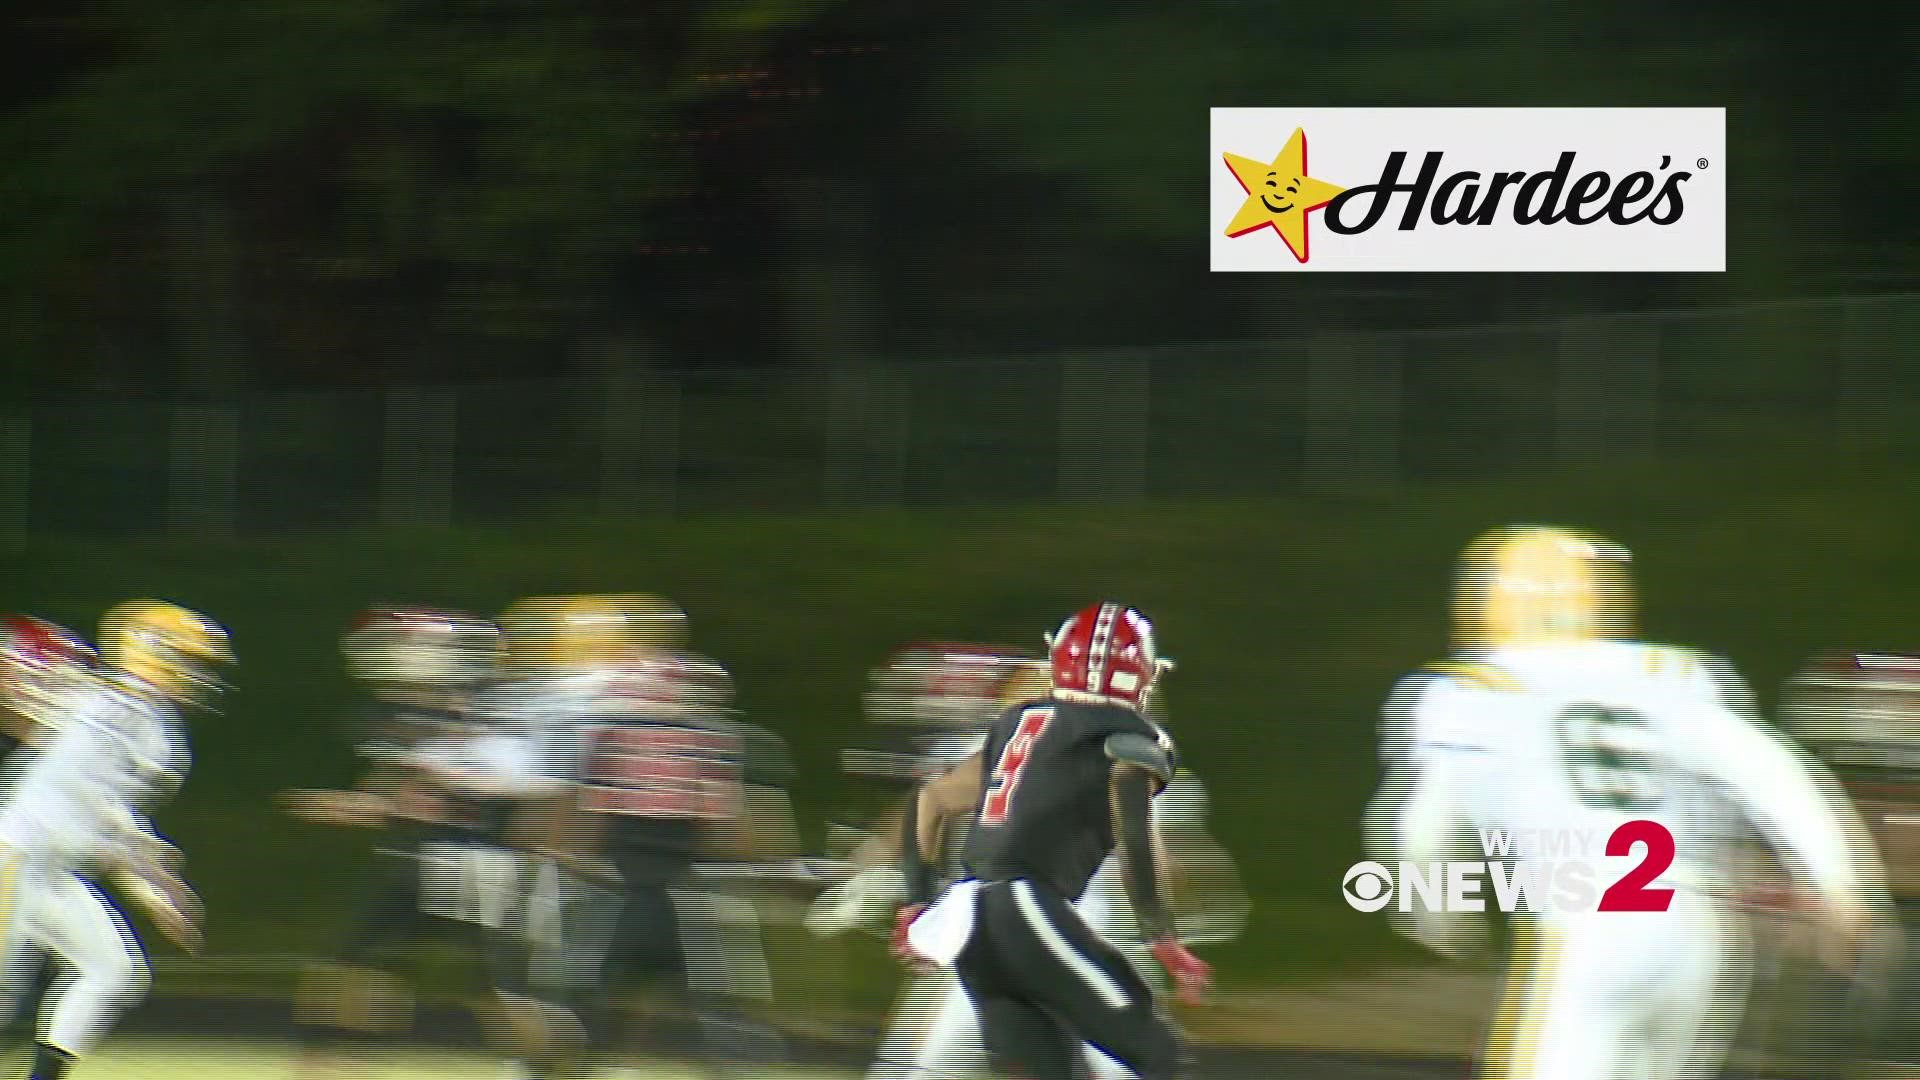 Our Drive of the Week is courtesy of the East Surry Cardinals